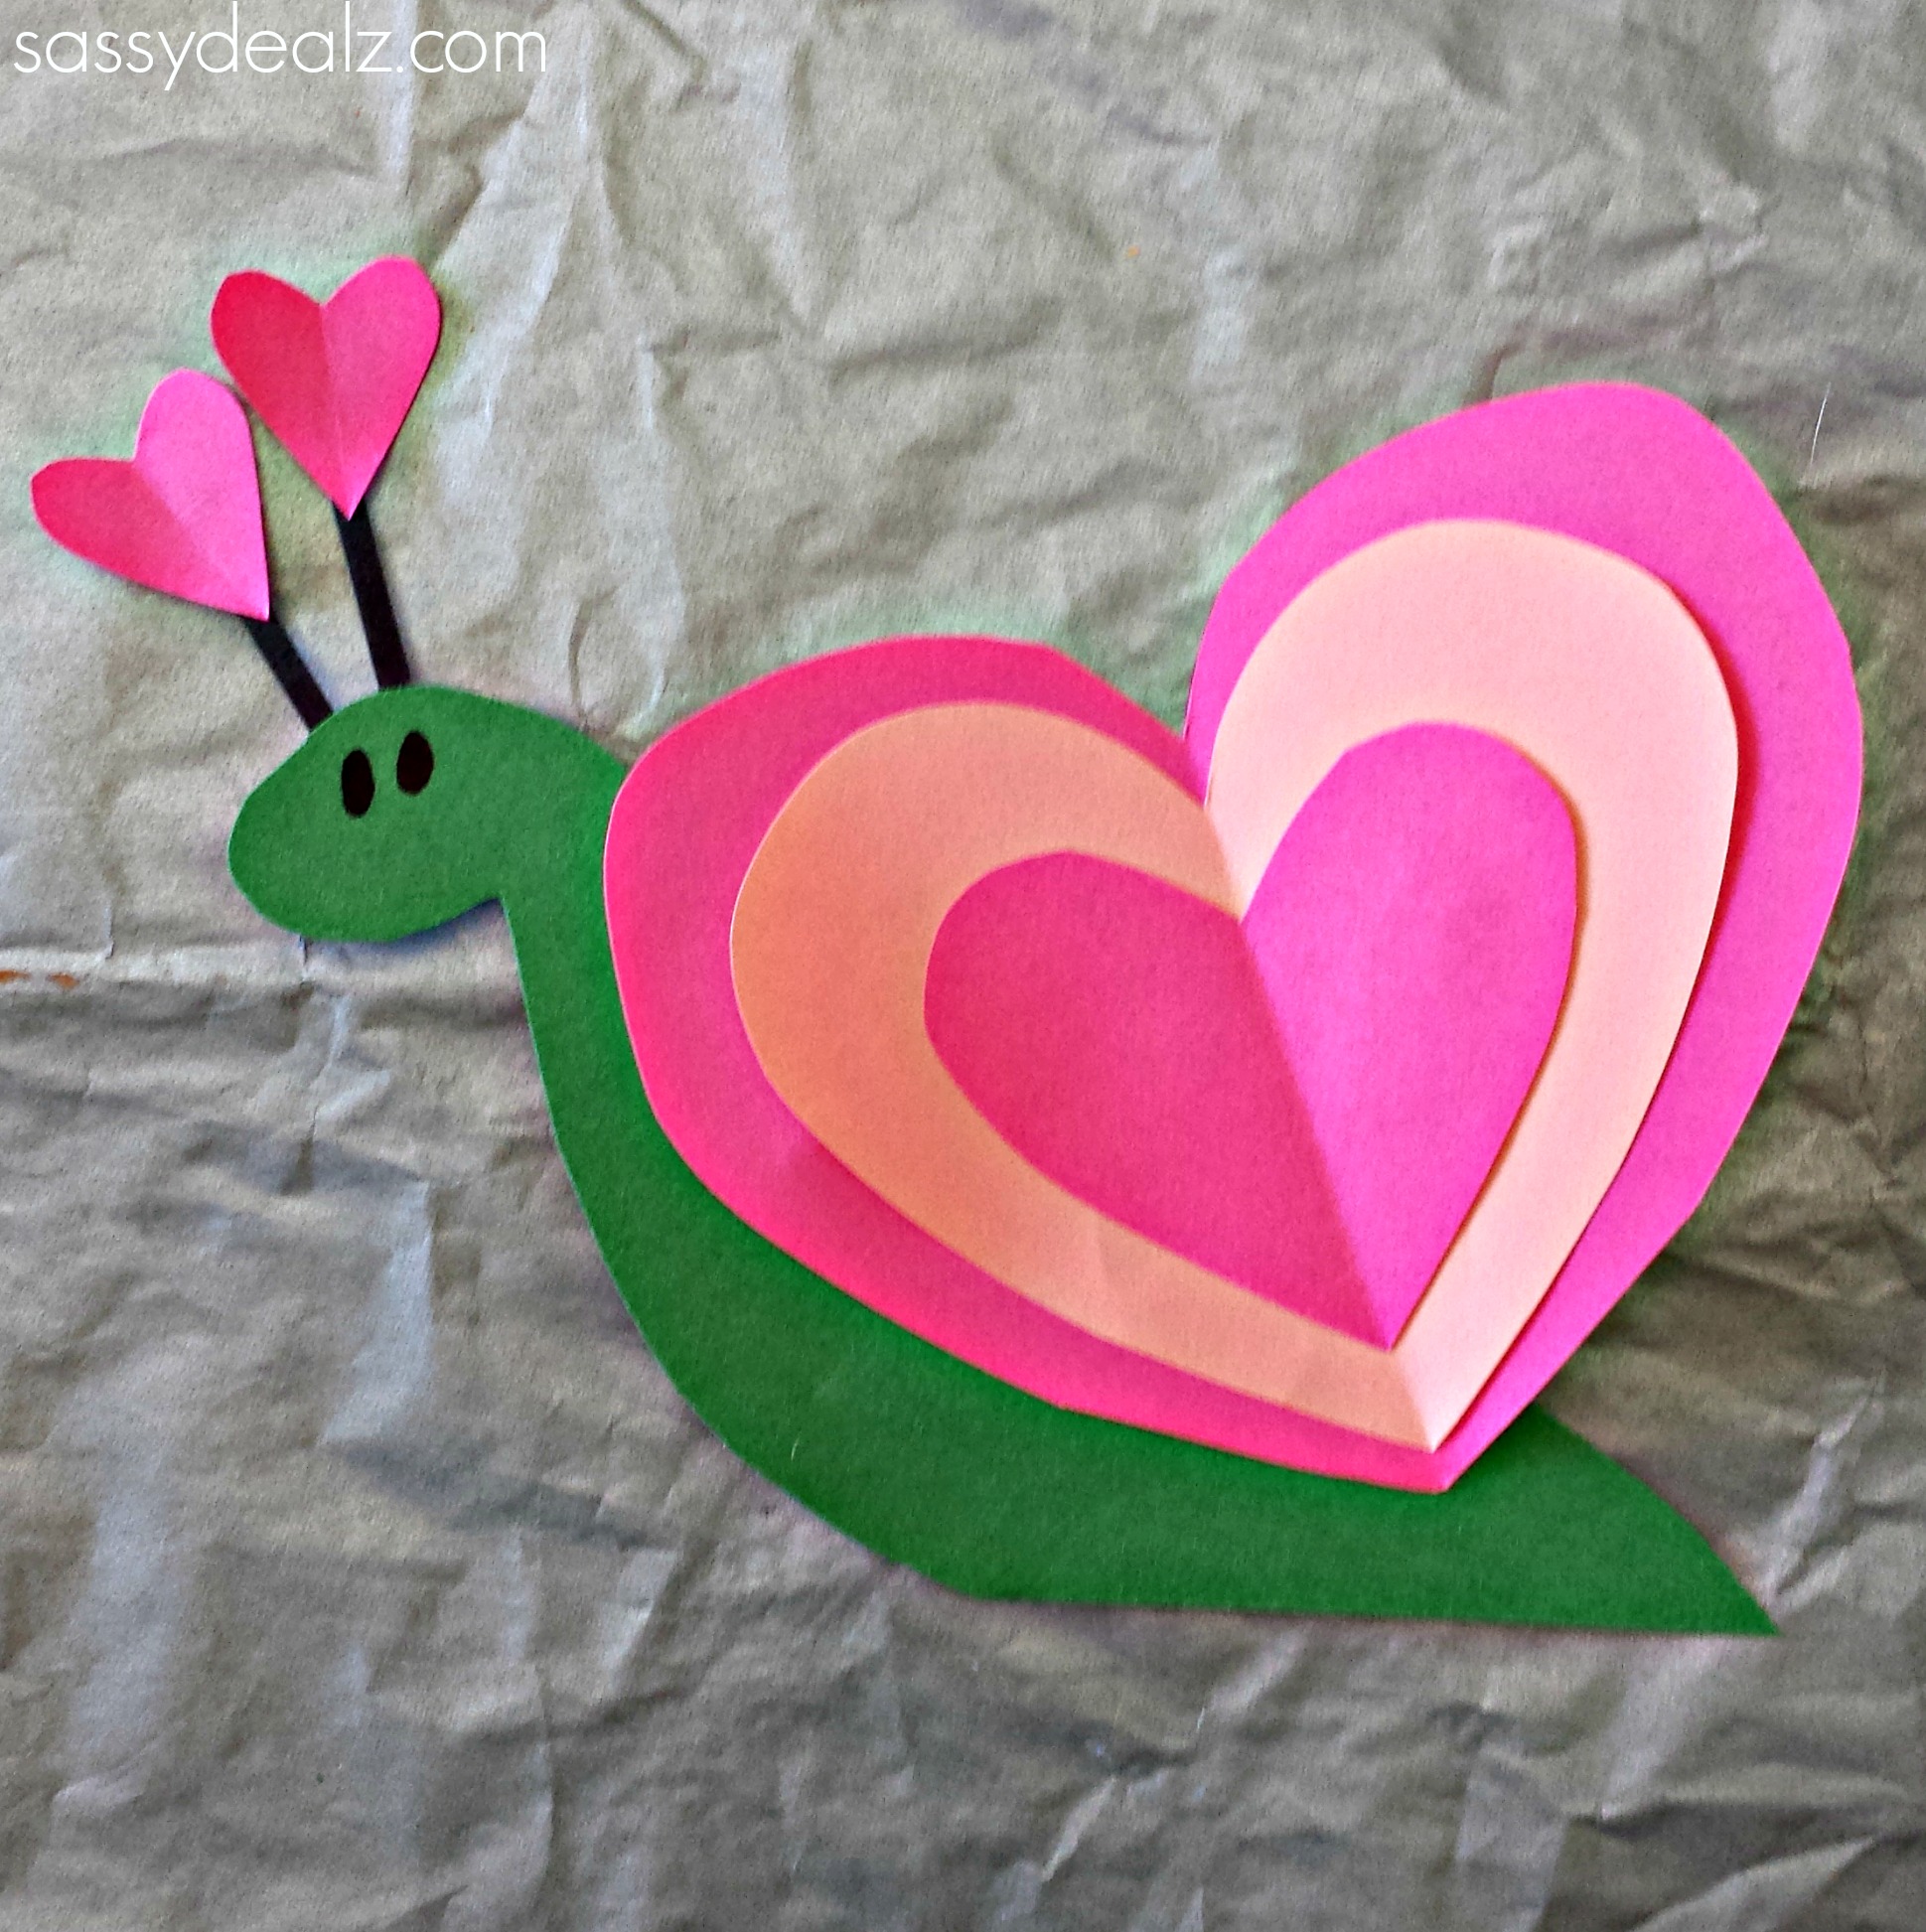 Heart Snail Craft For Kids (Valentine Art Project)